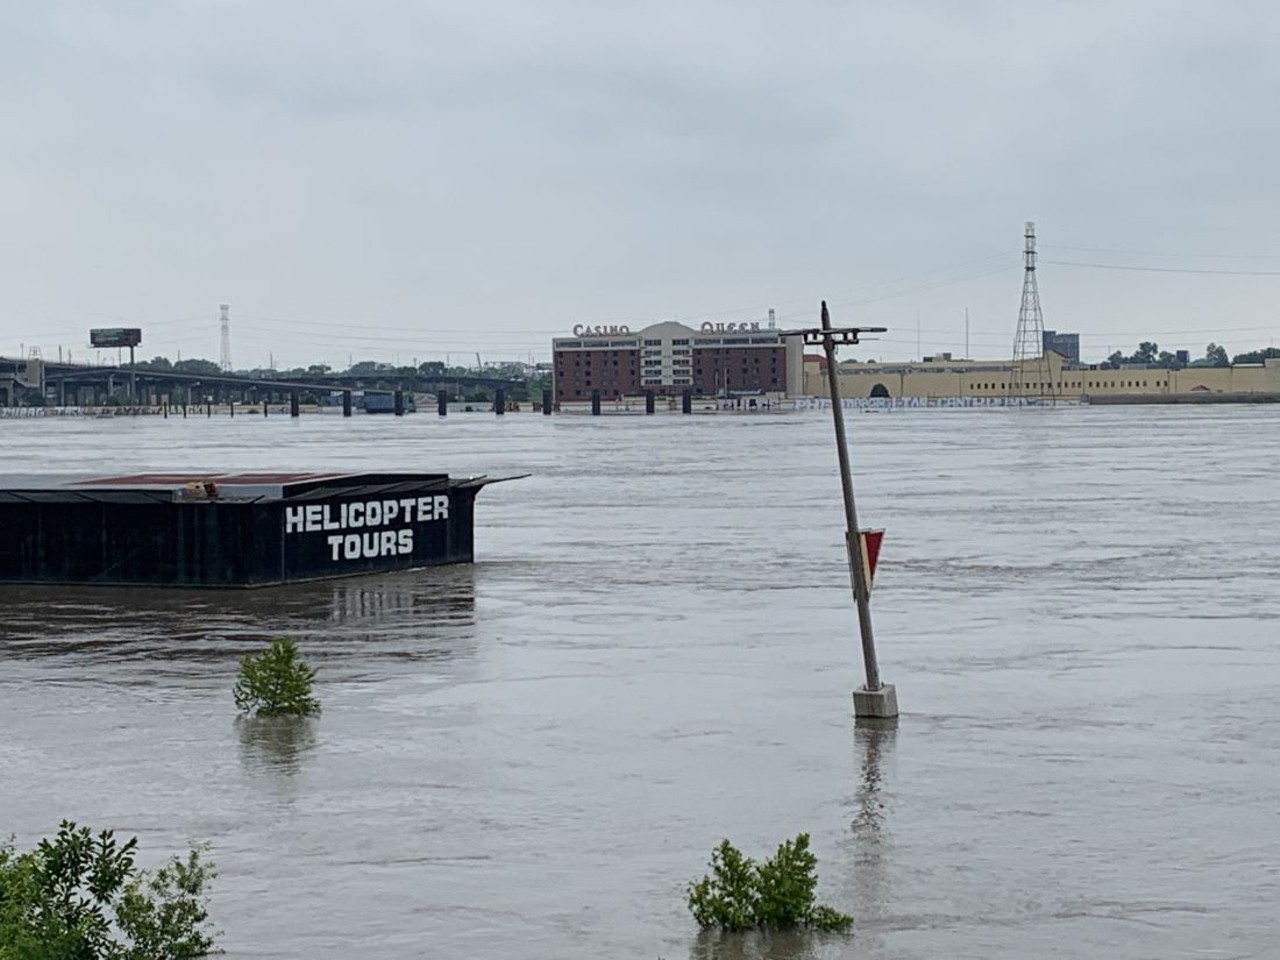 The Flooding in St. Louis at the Arch Is Insane as the Mississippi River Crests [PHOTOS]